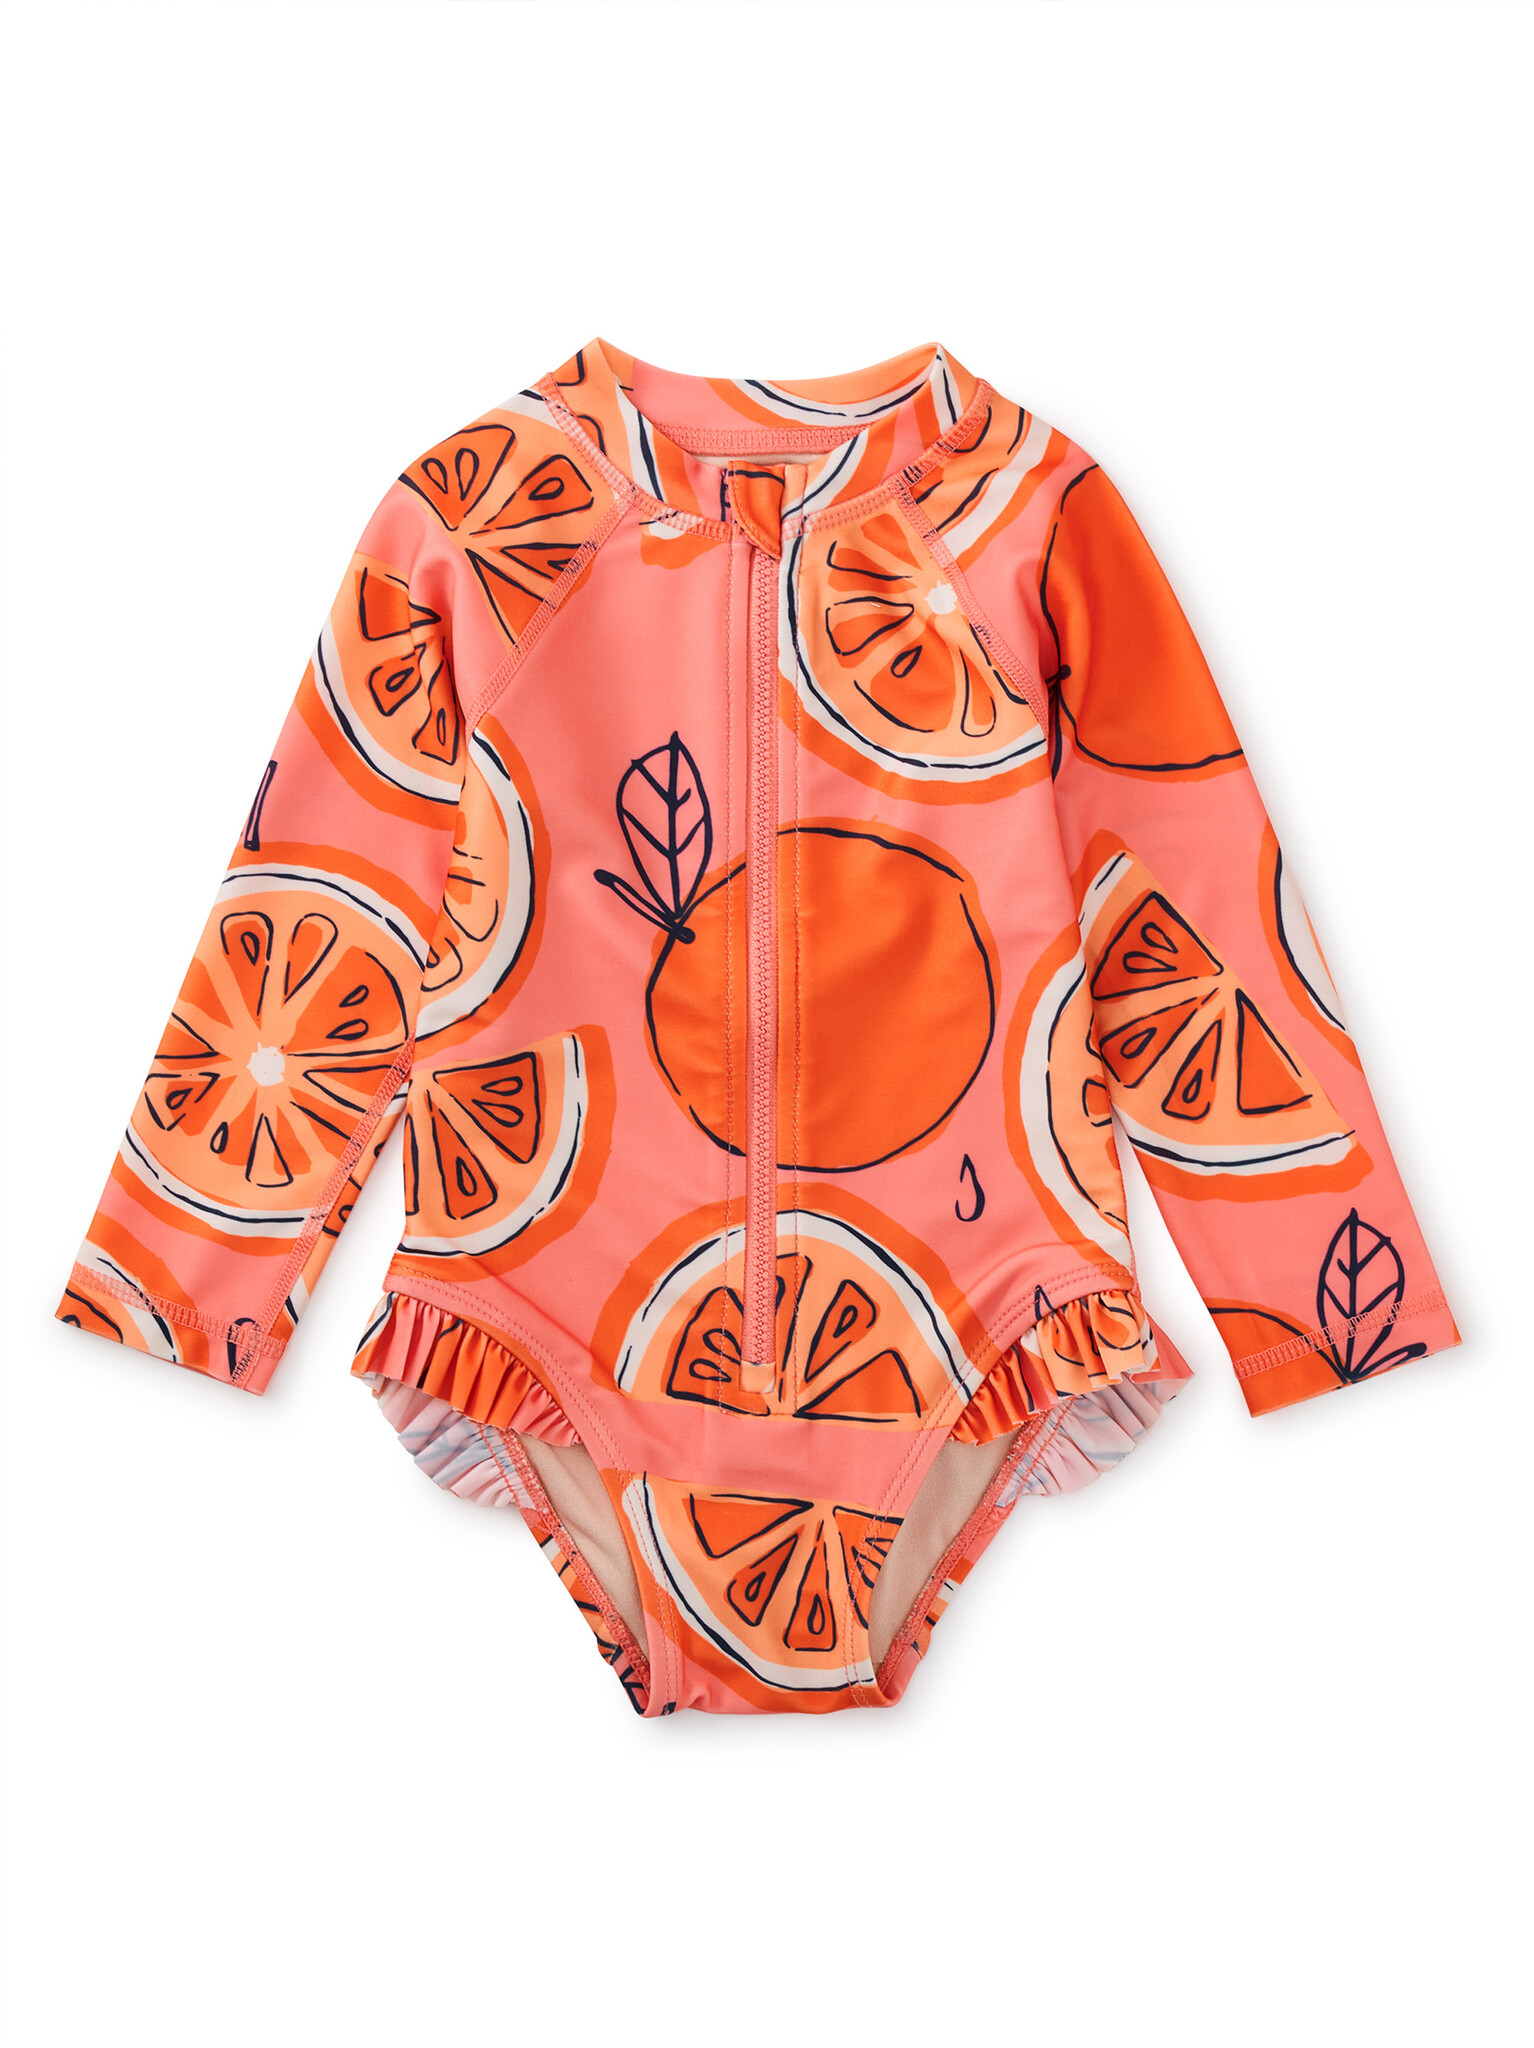 Tea Collection Long Sleeve Baby Rash Guard One Piece - Tossed Citrus